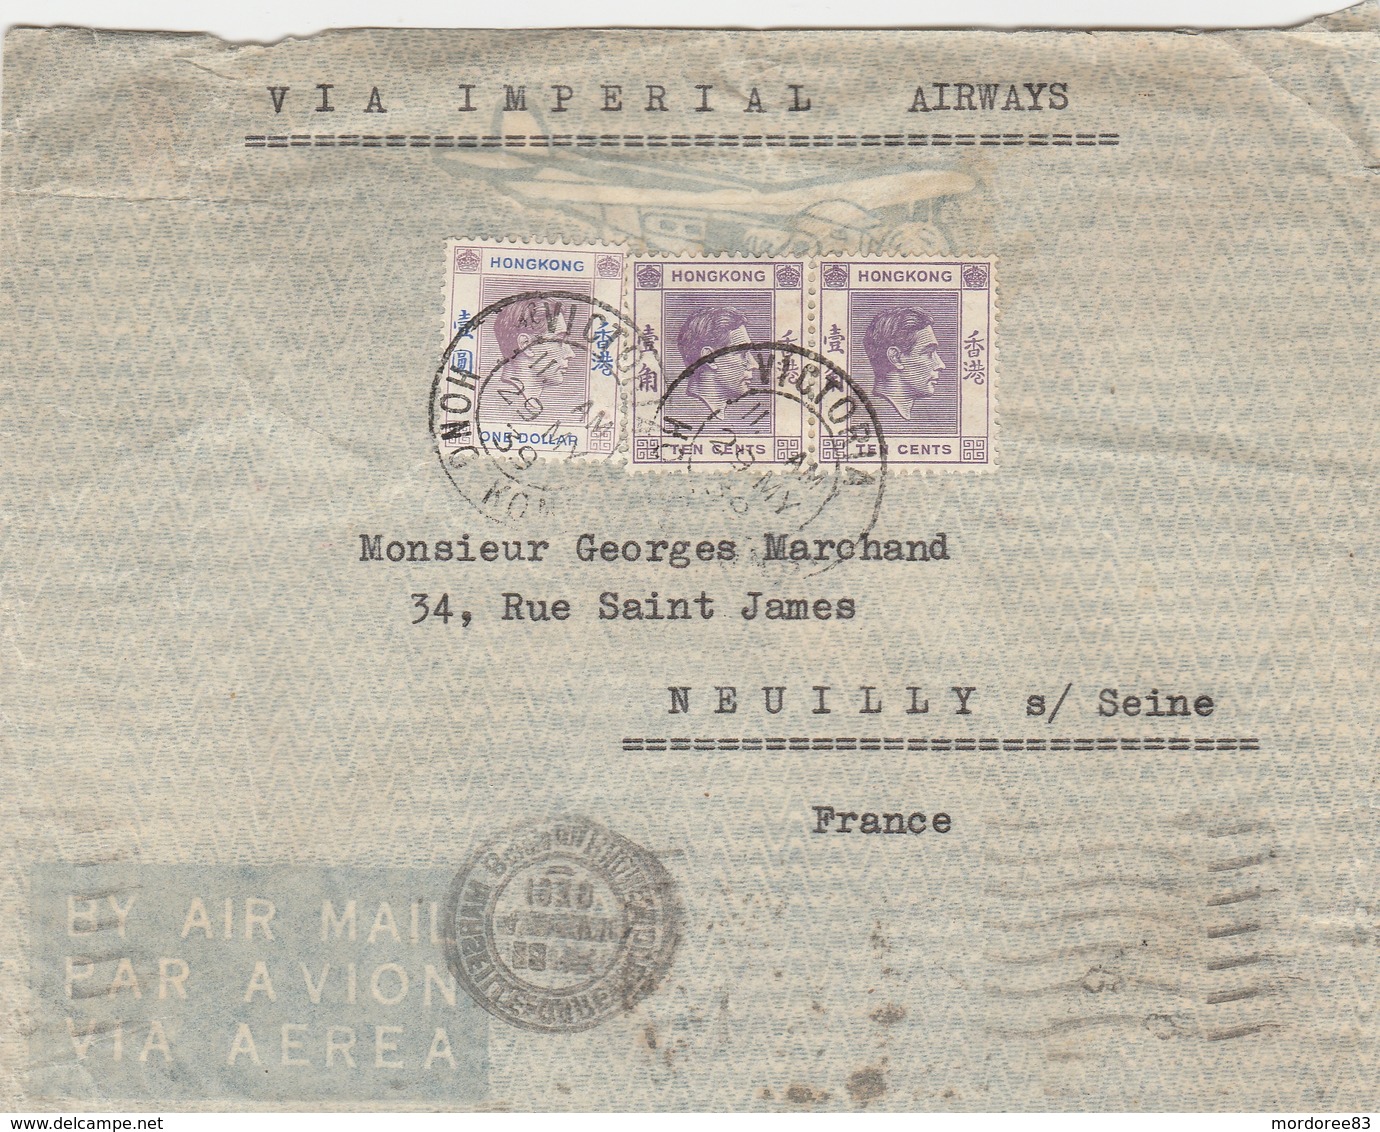 HONG KONG GEORGE VI 1 DOLLAR + PAIRE 10 C YT 153+145 SUR LETTRE VIA IMPERIAL AIRWAYS VICTORIA 29/5/39 FRANCE NEUILLY S/S - Briefe U. Dokumente